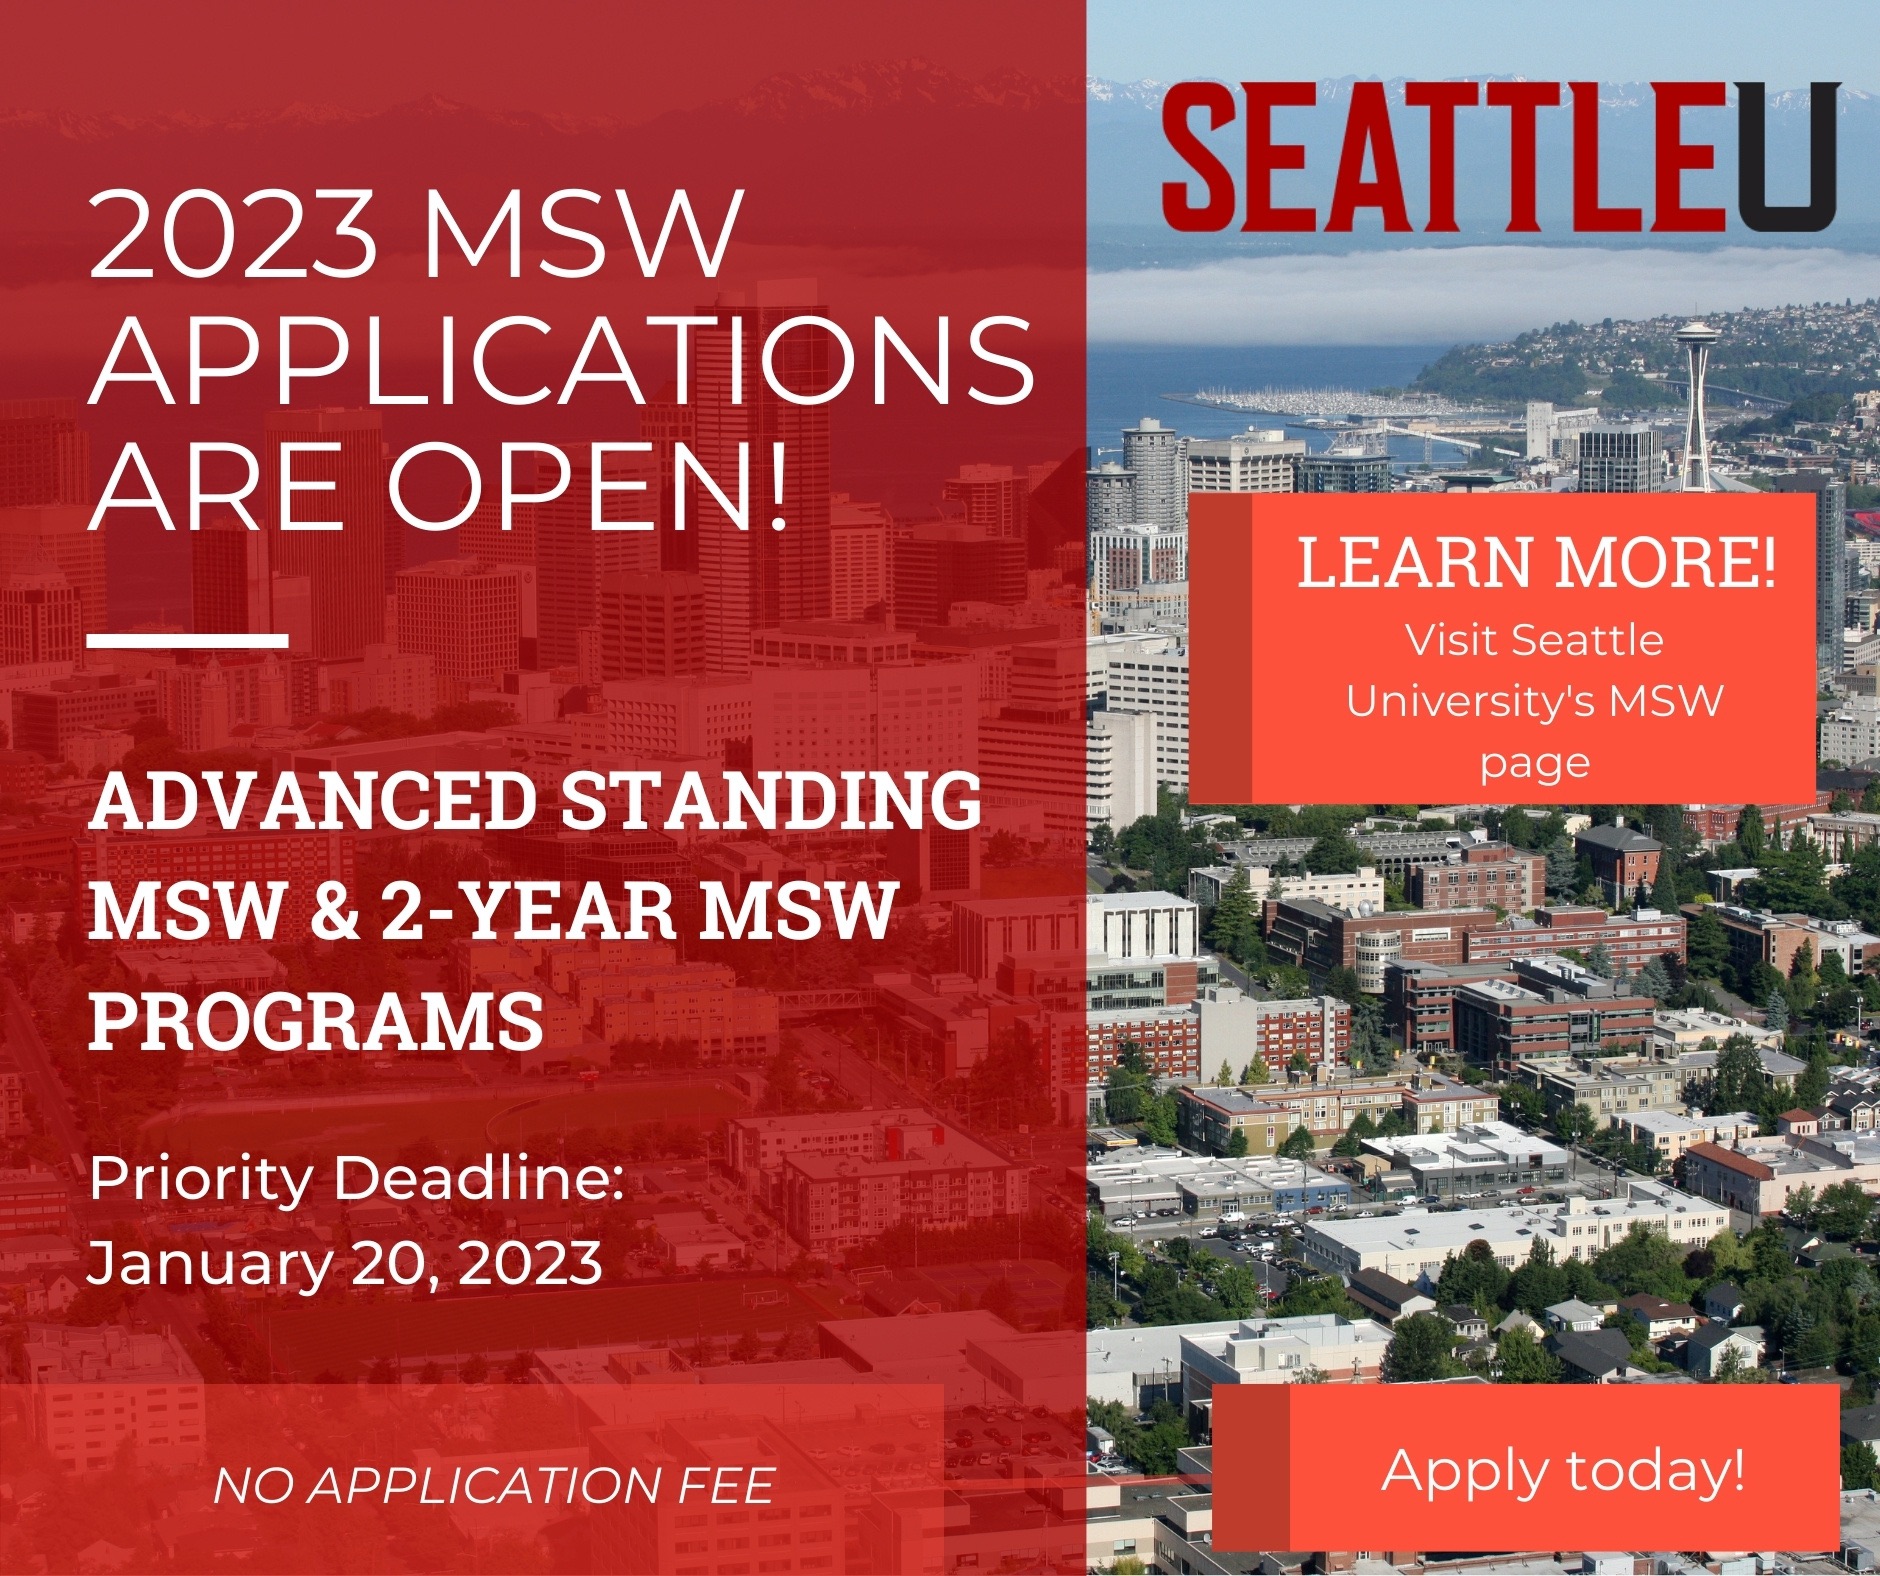 Announcement graphic for opening of 2023 MSW Applications, with Advanced-Standing and 2-Year Program options available.